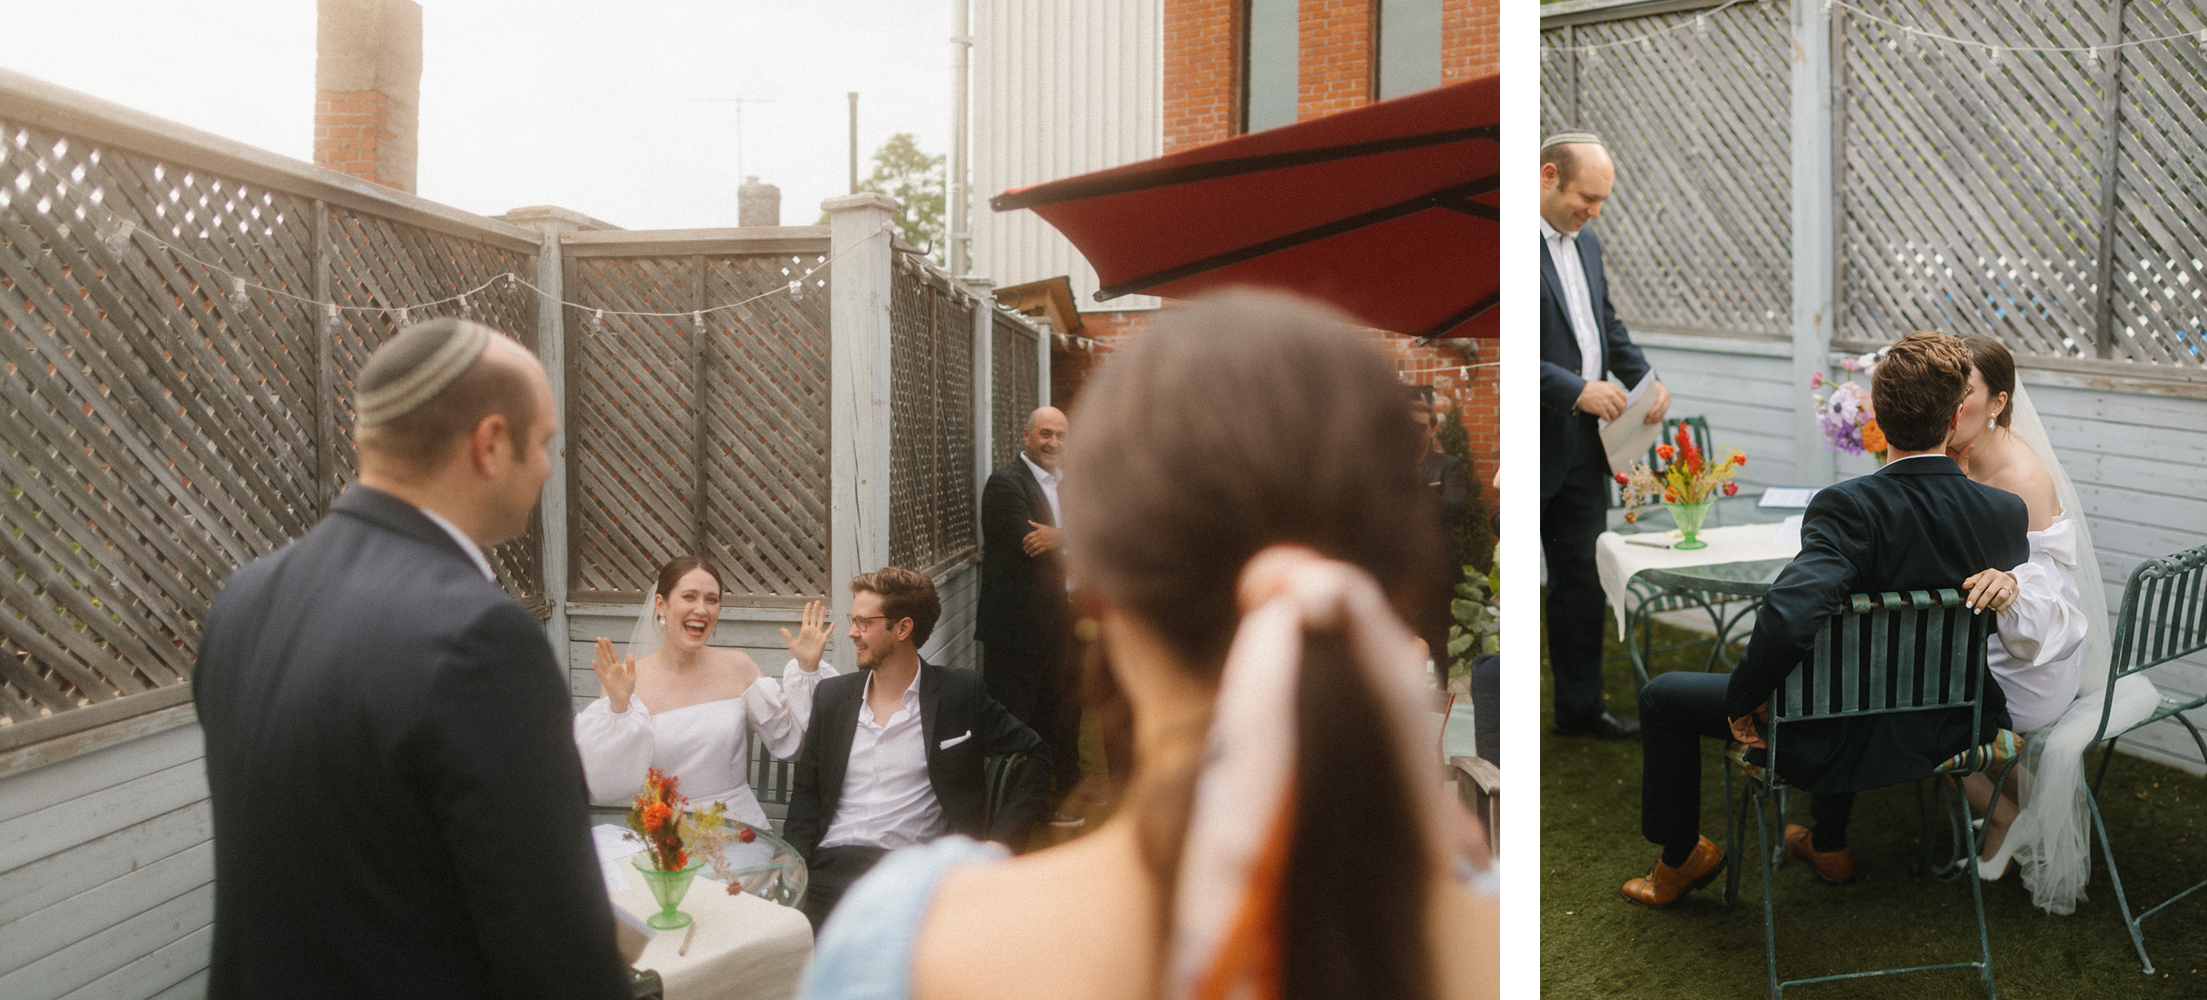 downtown-toronto-rooftop-elopement-vintage-inspiration-74.PNG